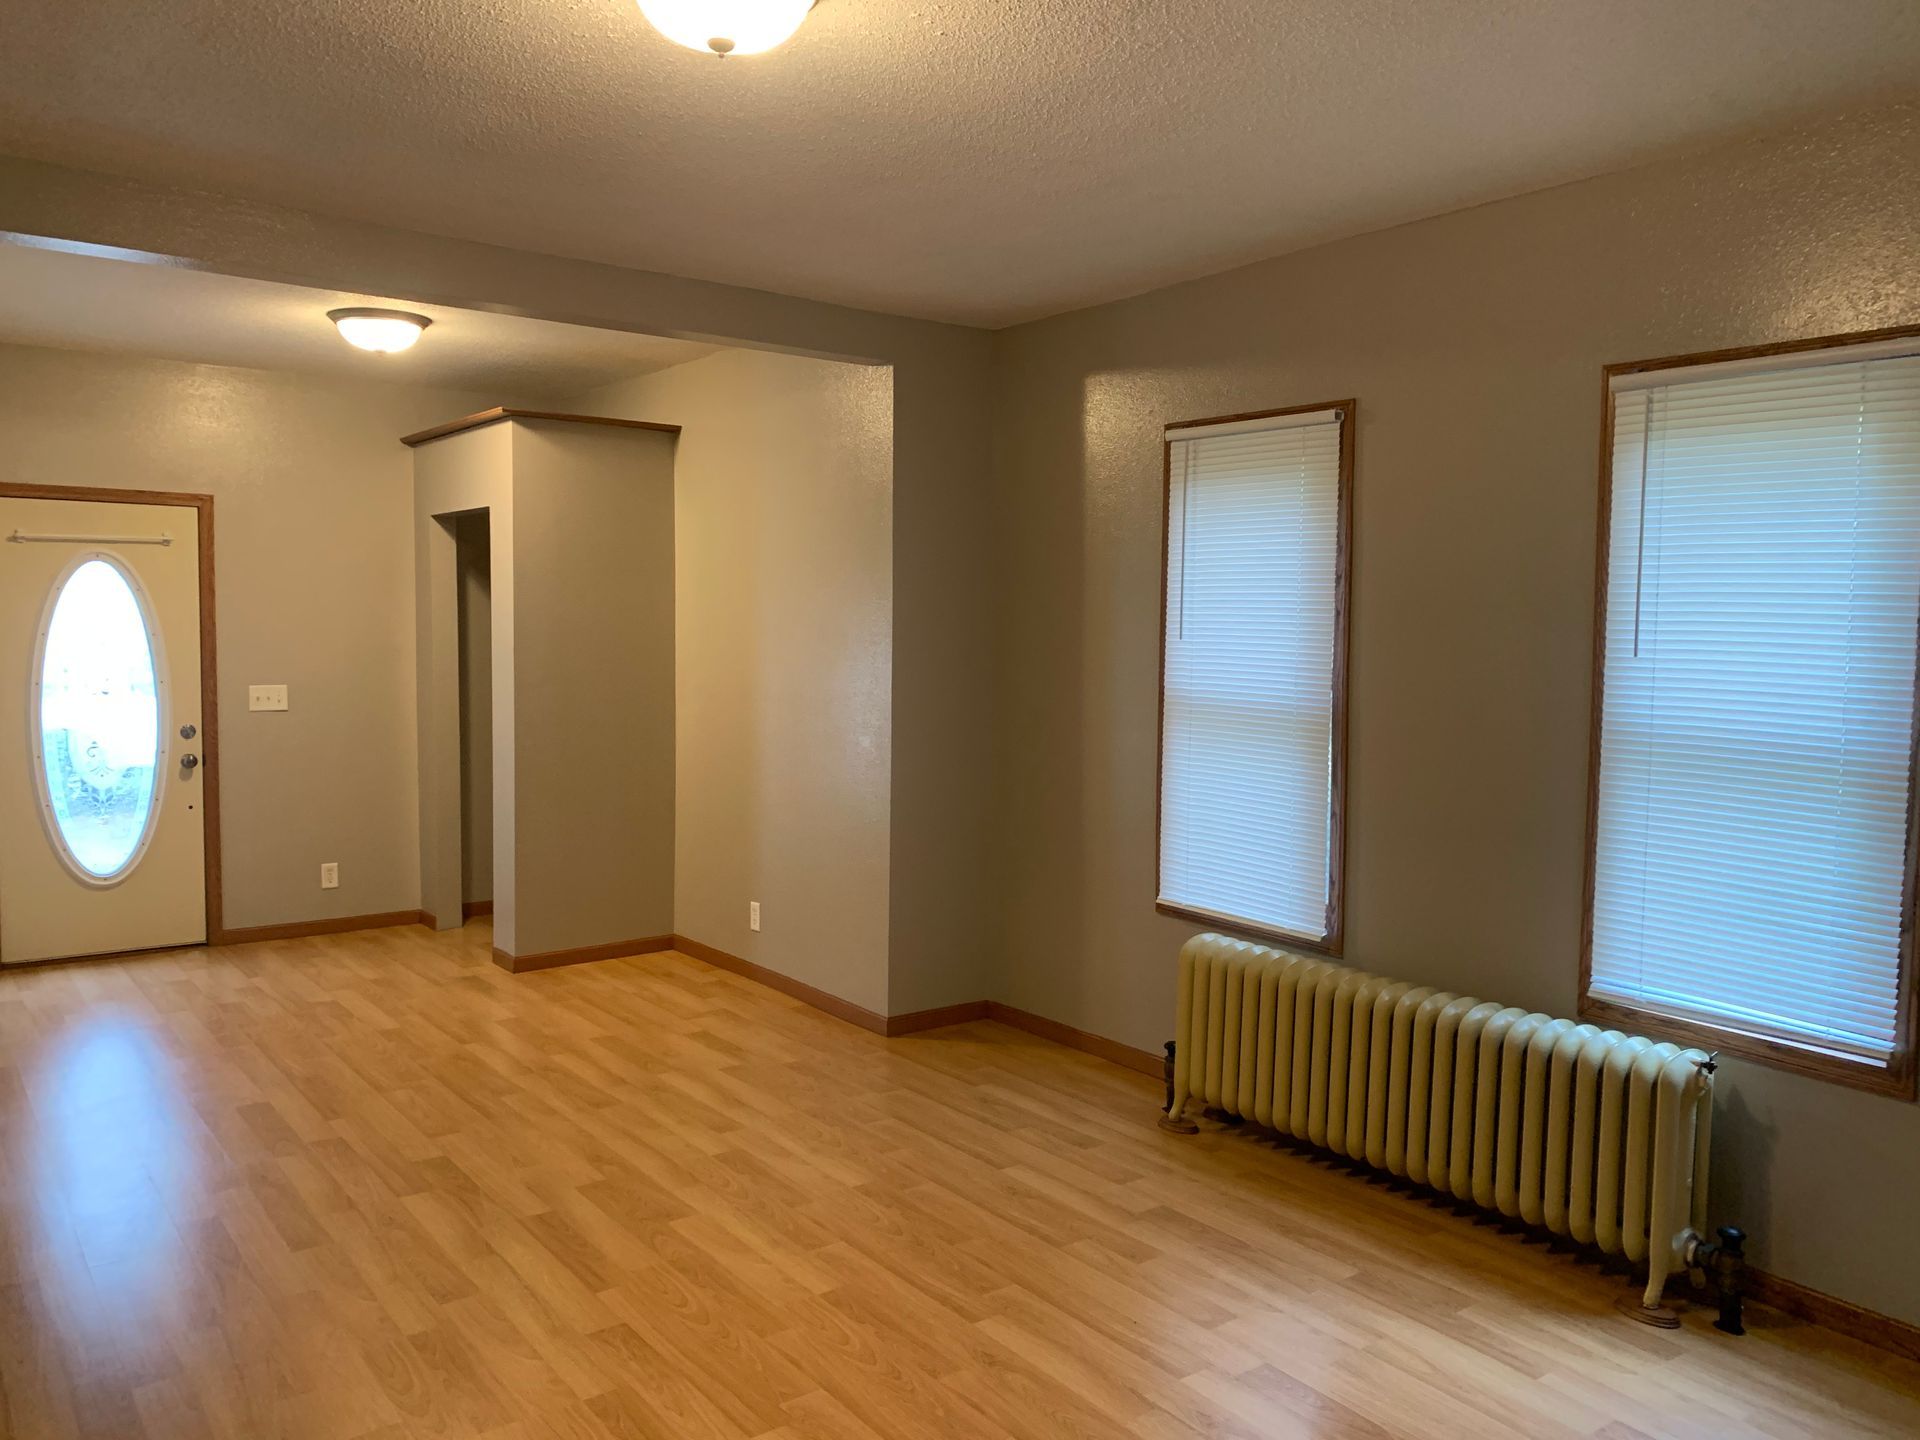 An empty living room with hardwood floors and a radiator.